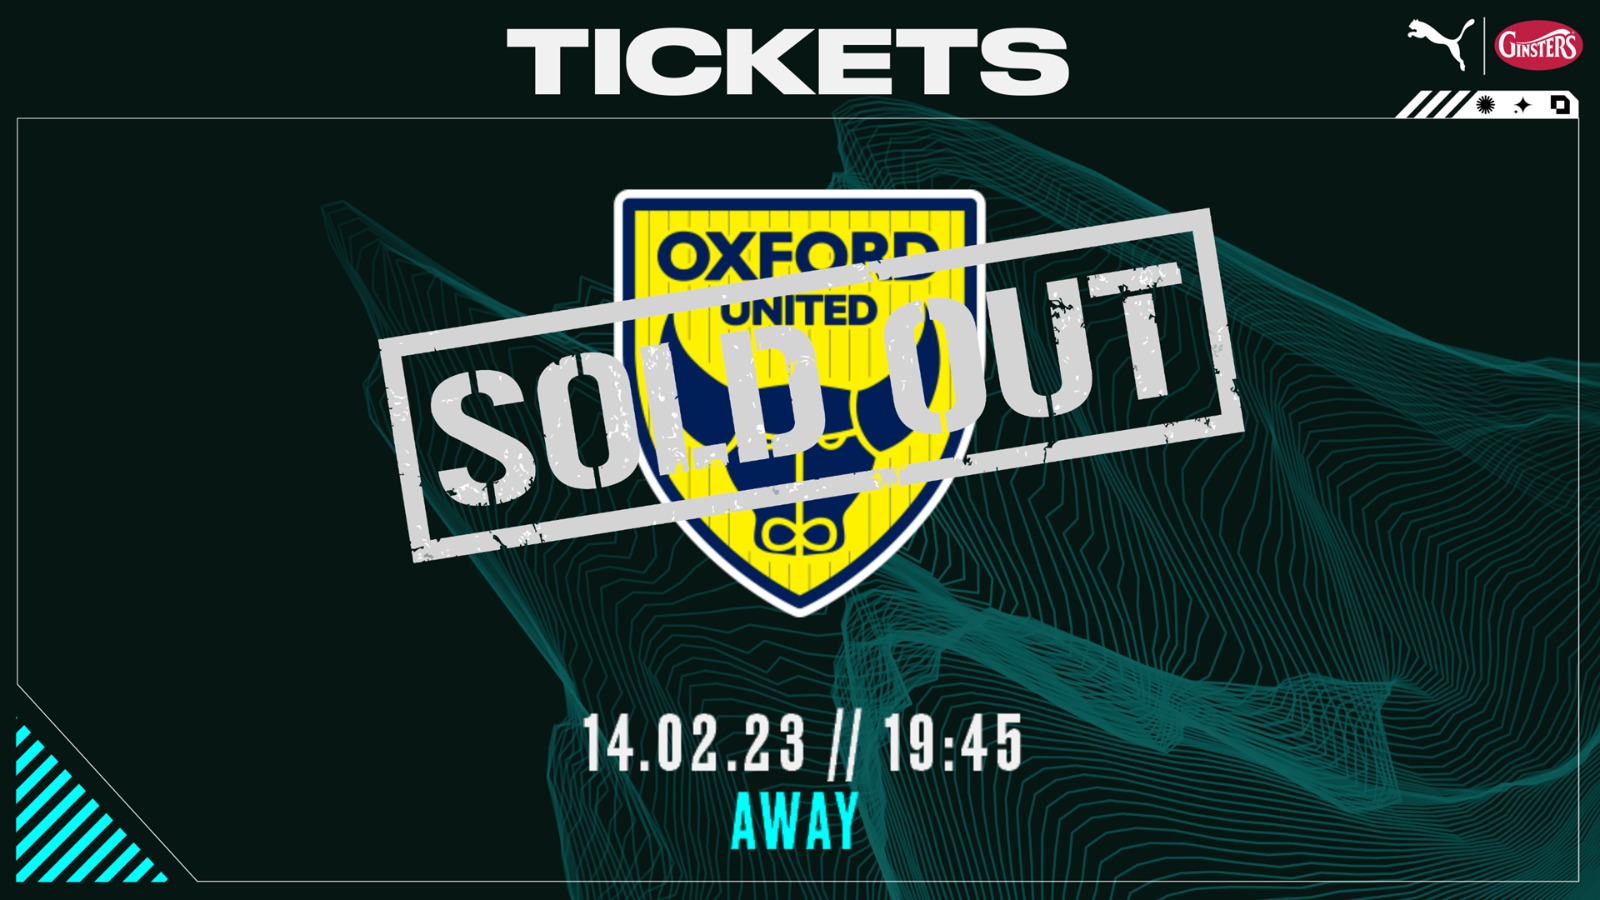 Oxford Tickets Sold Out